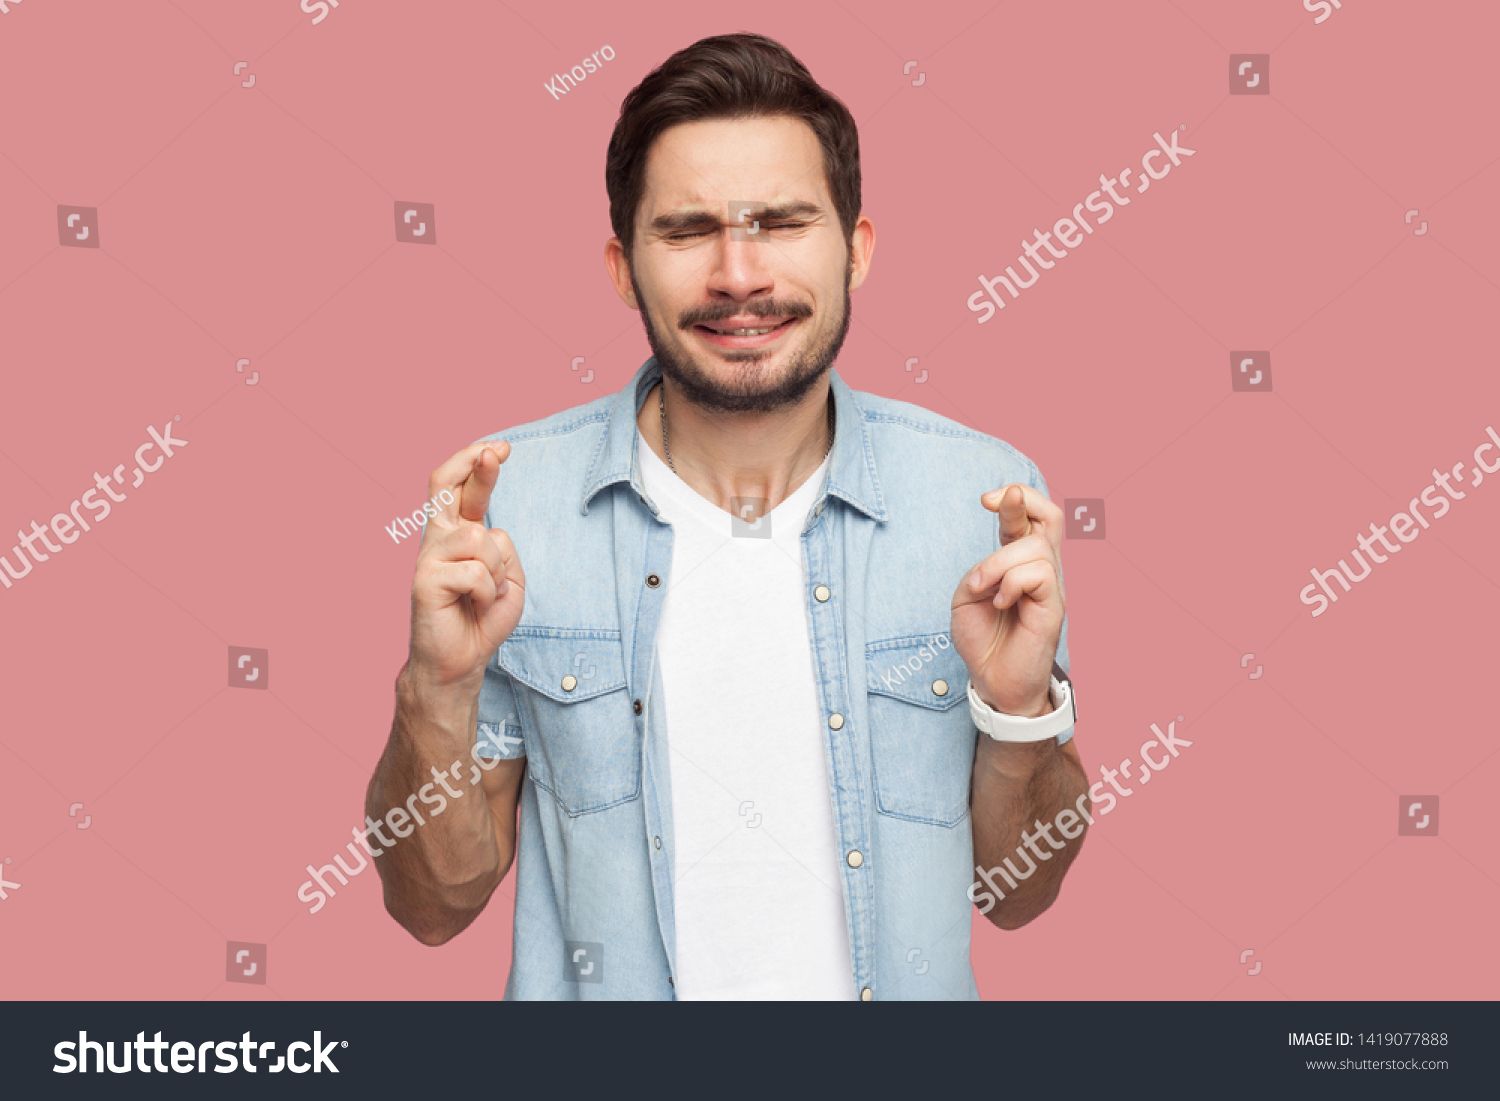 Portrait of hopeful handsome bearded young man in blue casual style shirt standing with crossed fingers, closed eyes and hope to win. indoor studio shot, isolated on pink background. #1419077888